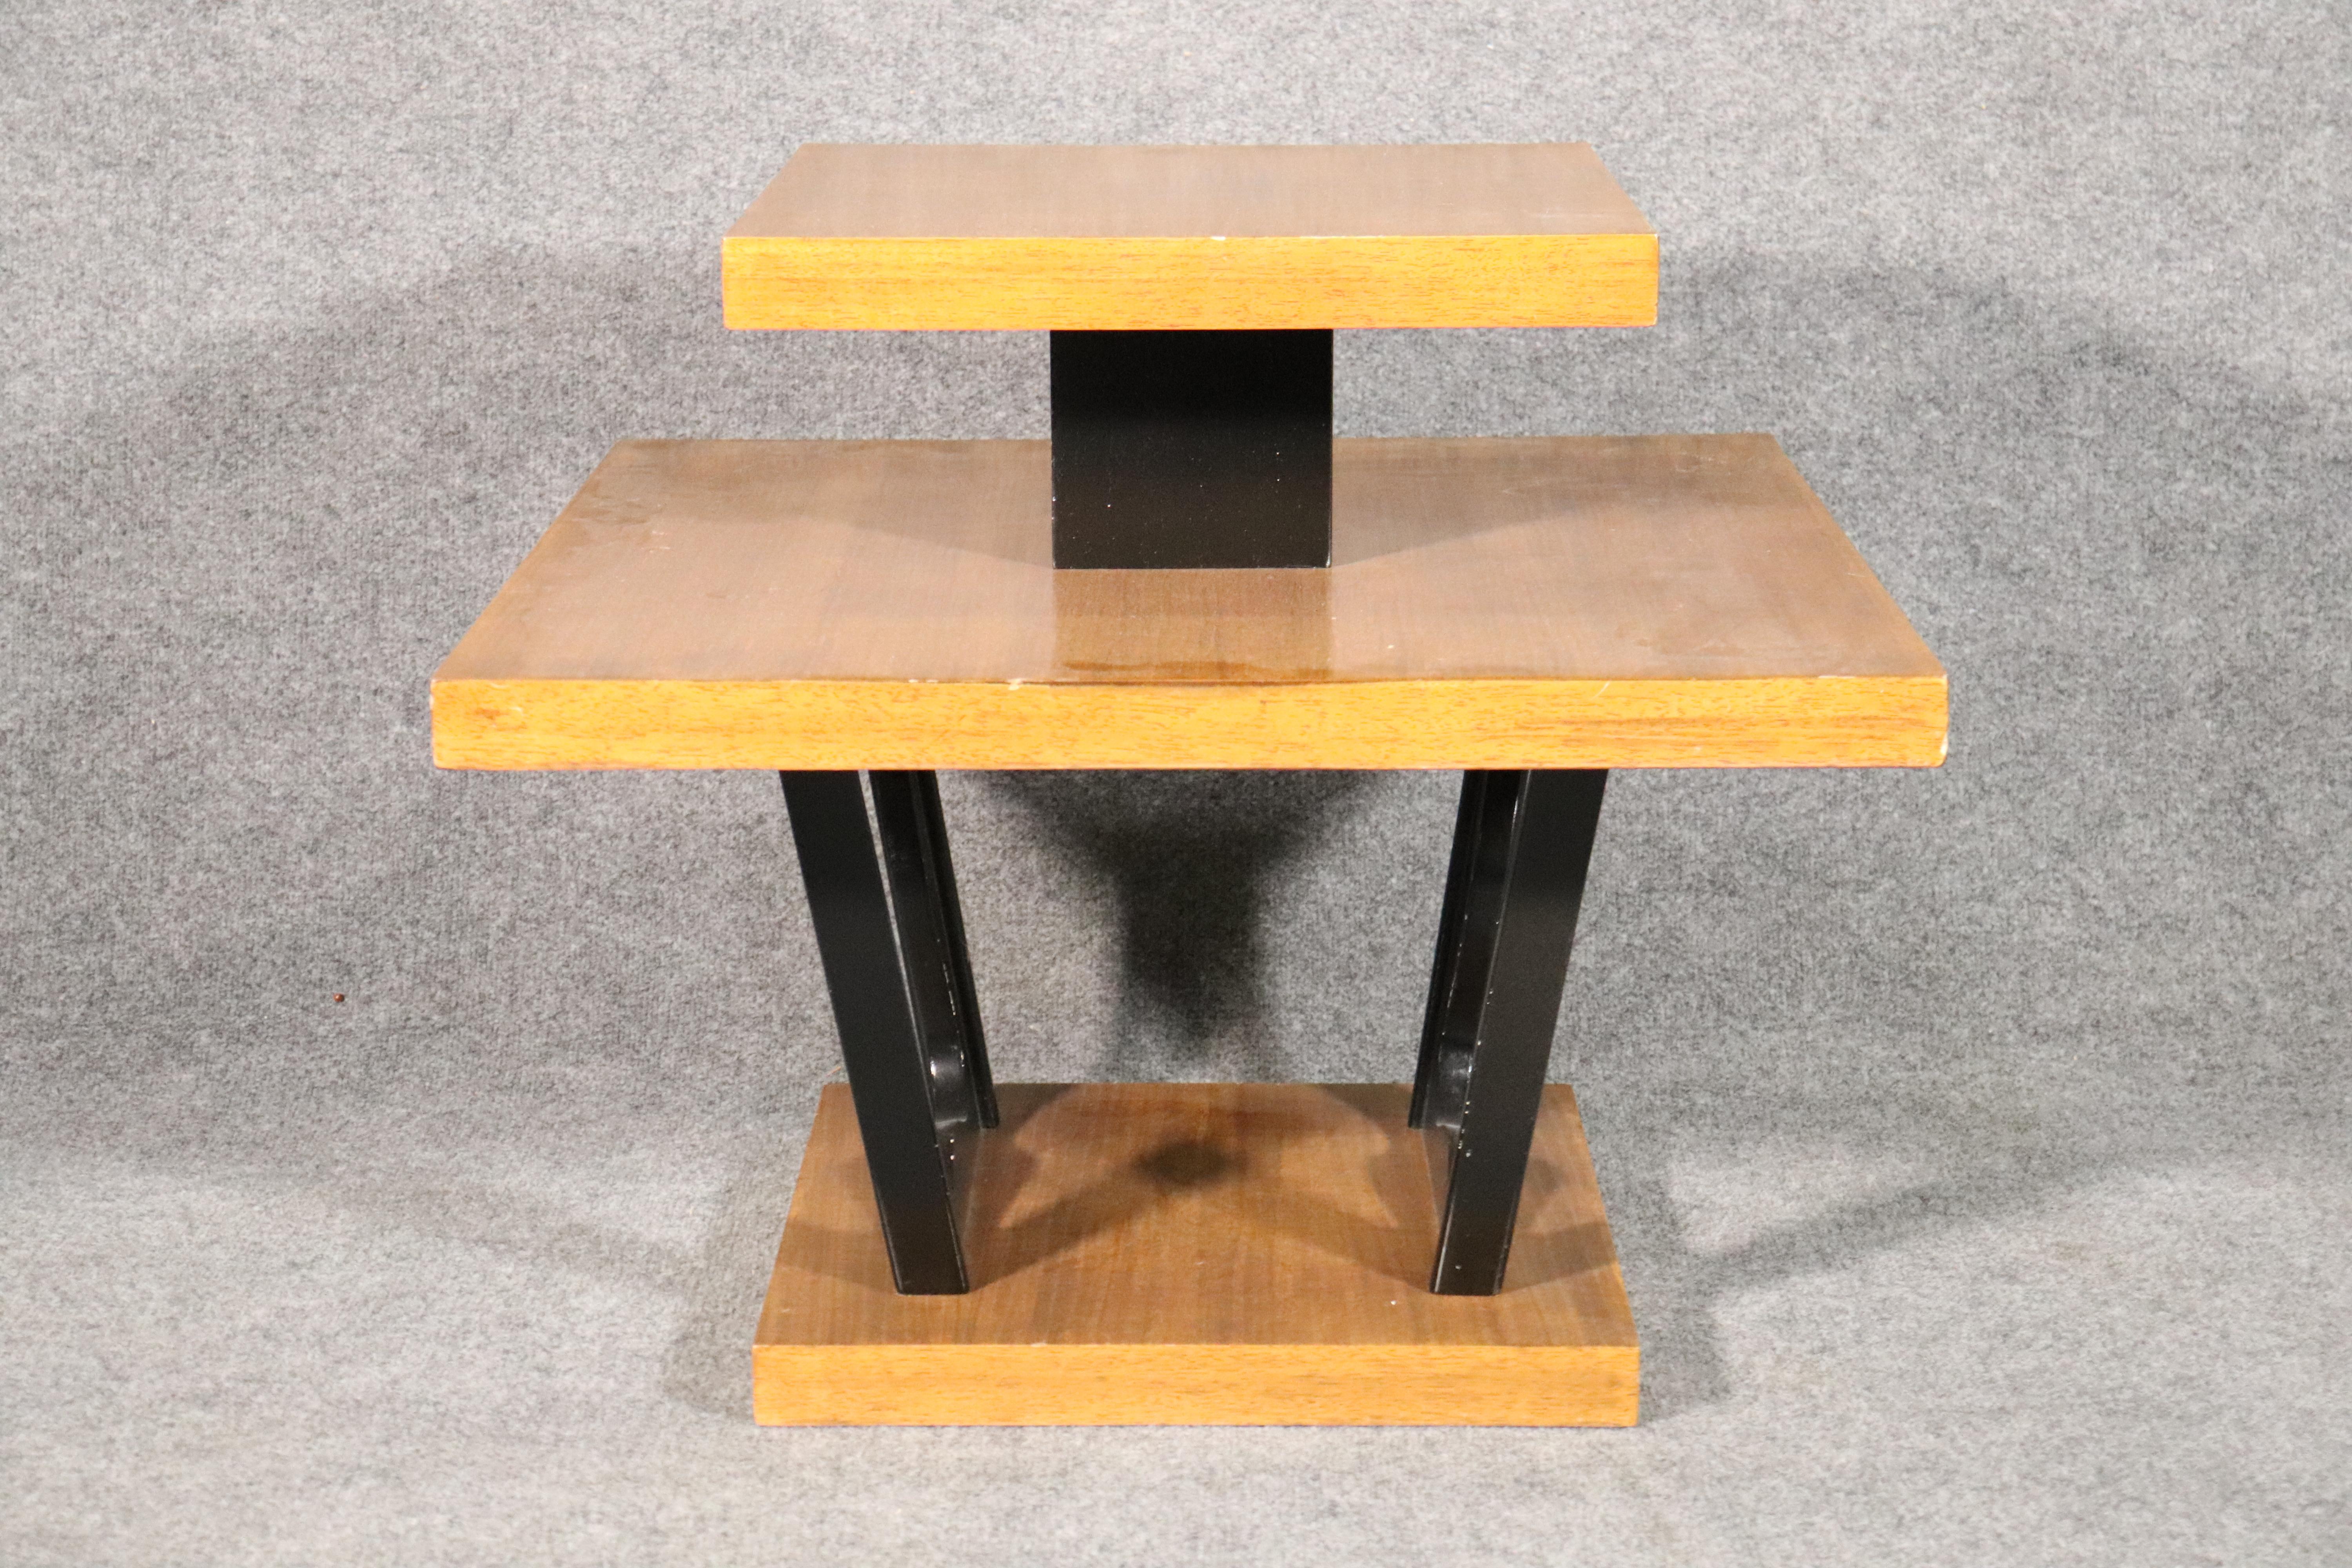 Unique two tone table with blonde mahogany grain and black accenting supports. 
Please confirm location